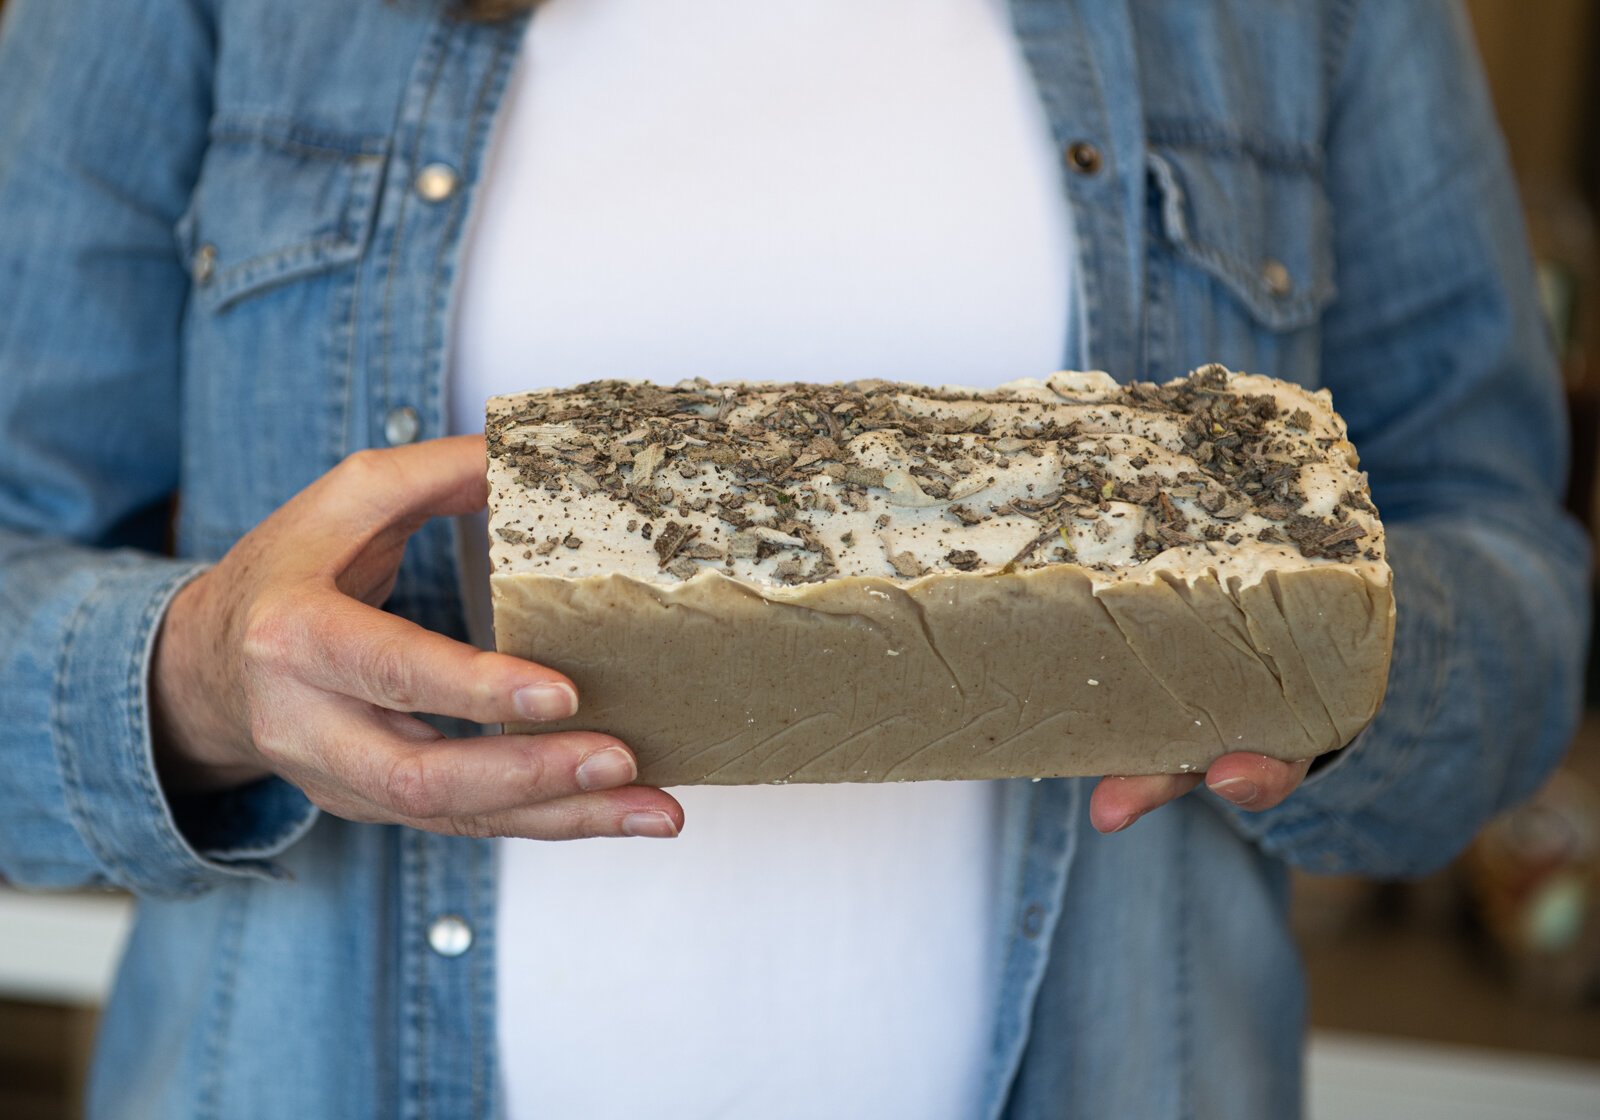 Heather Eracleous, owner of Vessell Refillery FW, holds a blueberry sage soap loaf she gets from a local supplier.